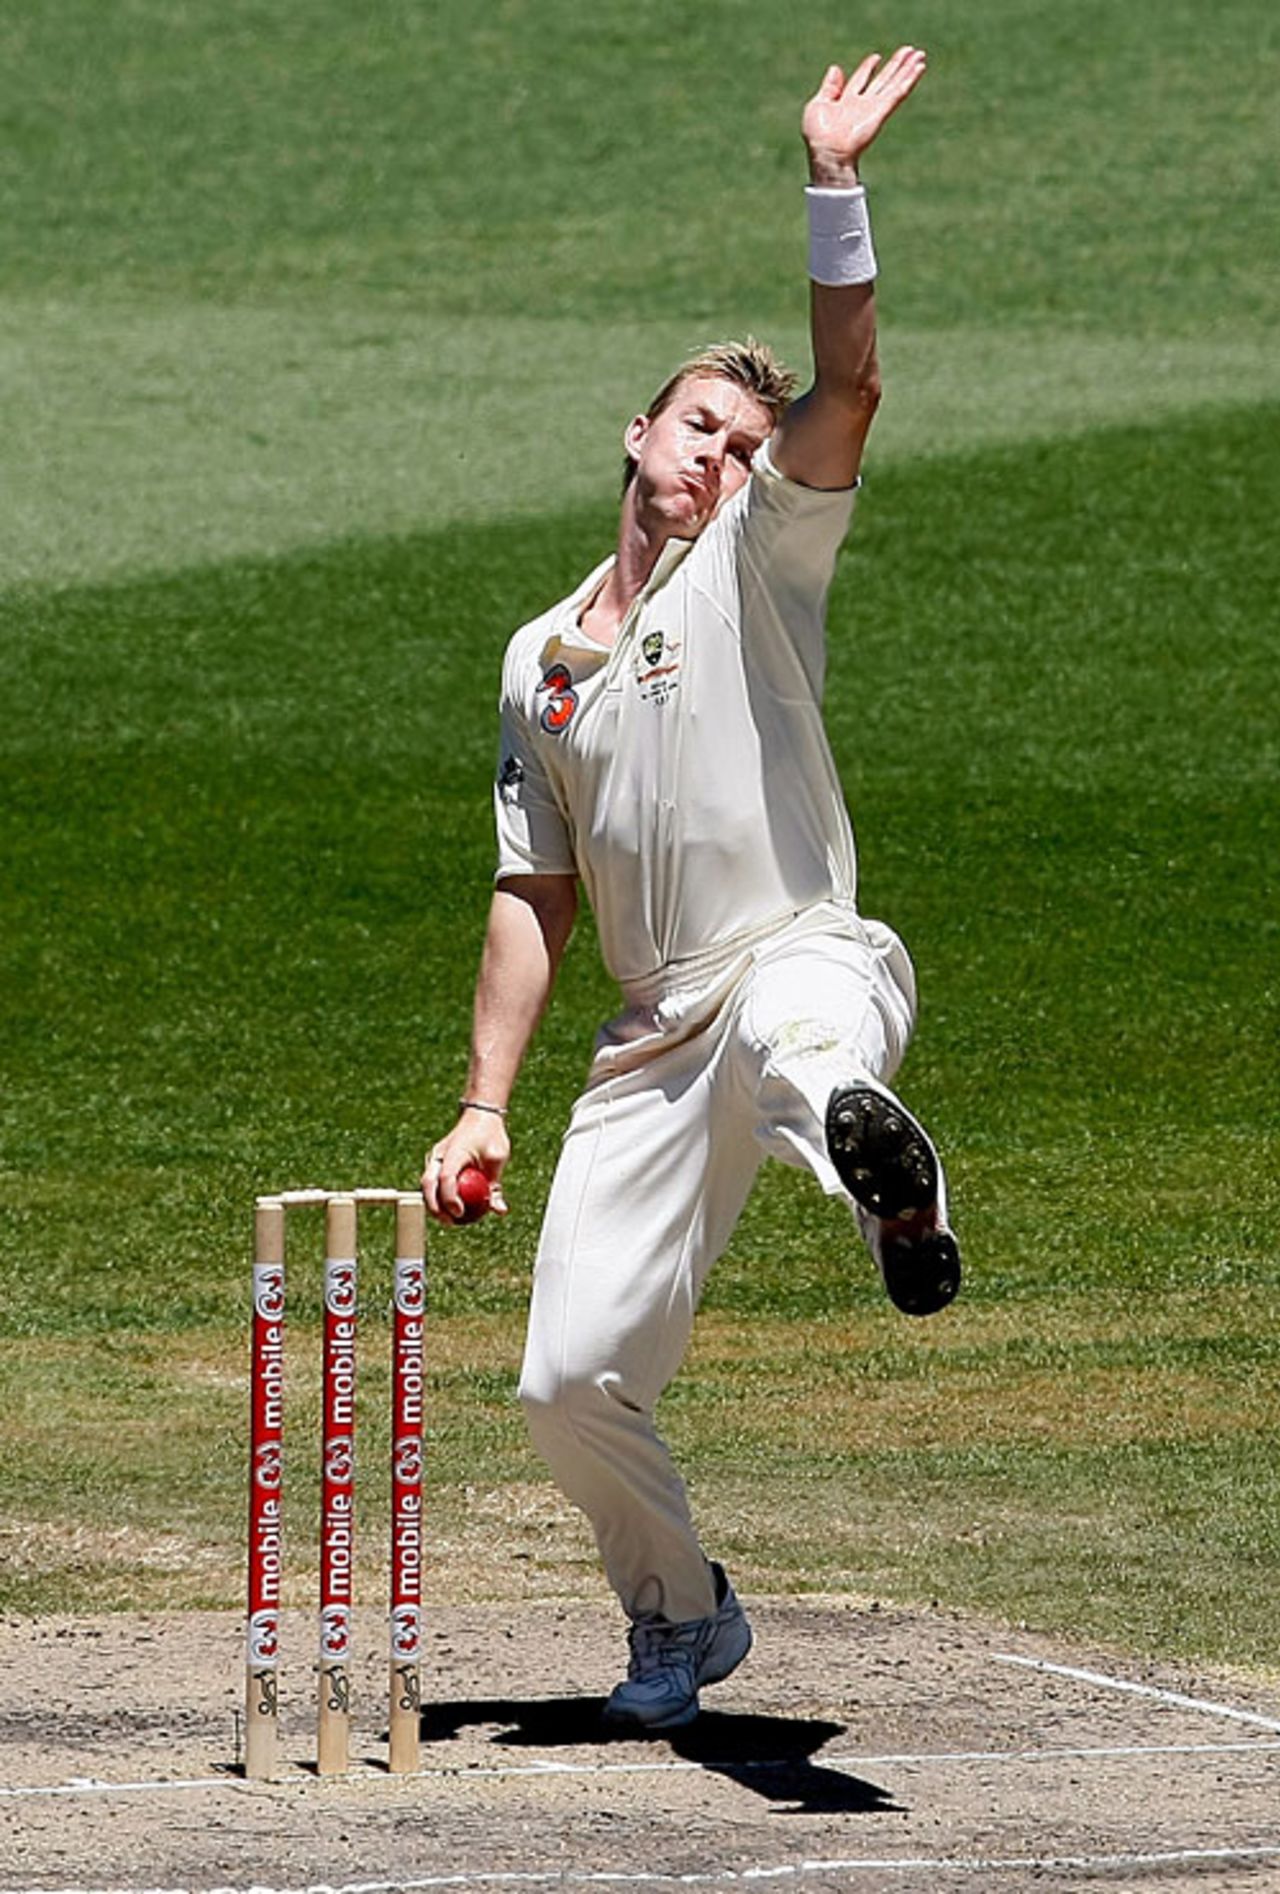 Brett Lee charges in to bowl, Australia v India, 1st Test, Melbourne, 4th day, December 29, 2007